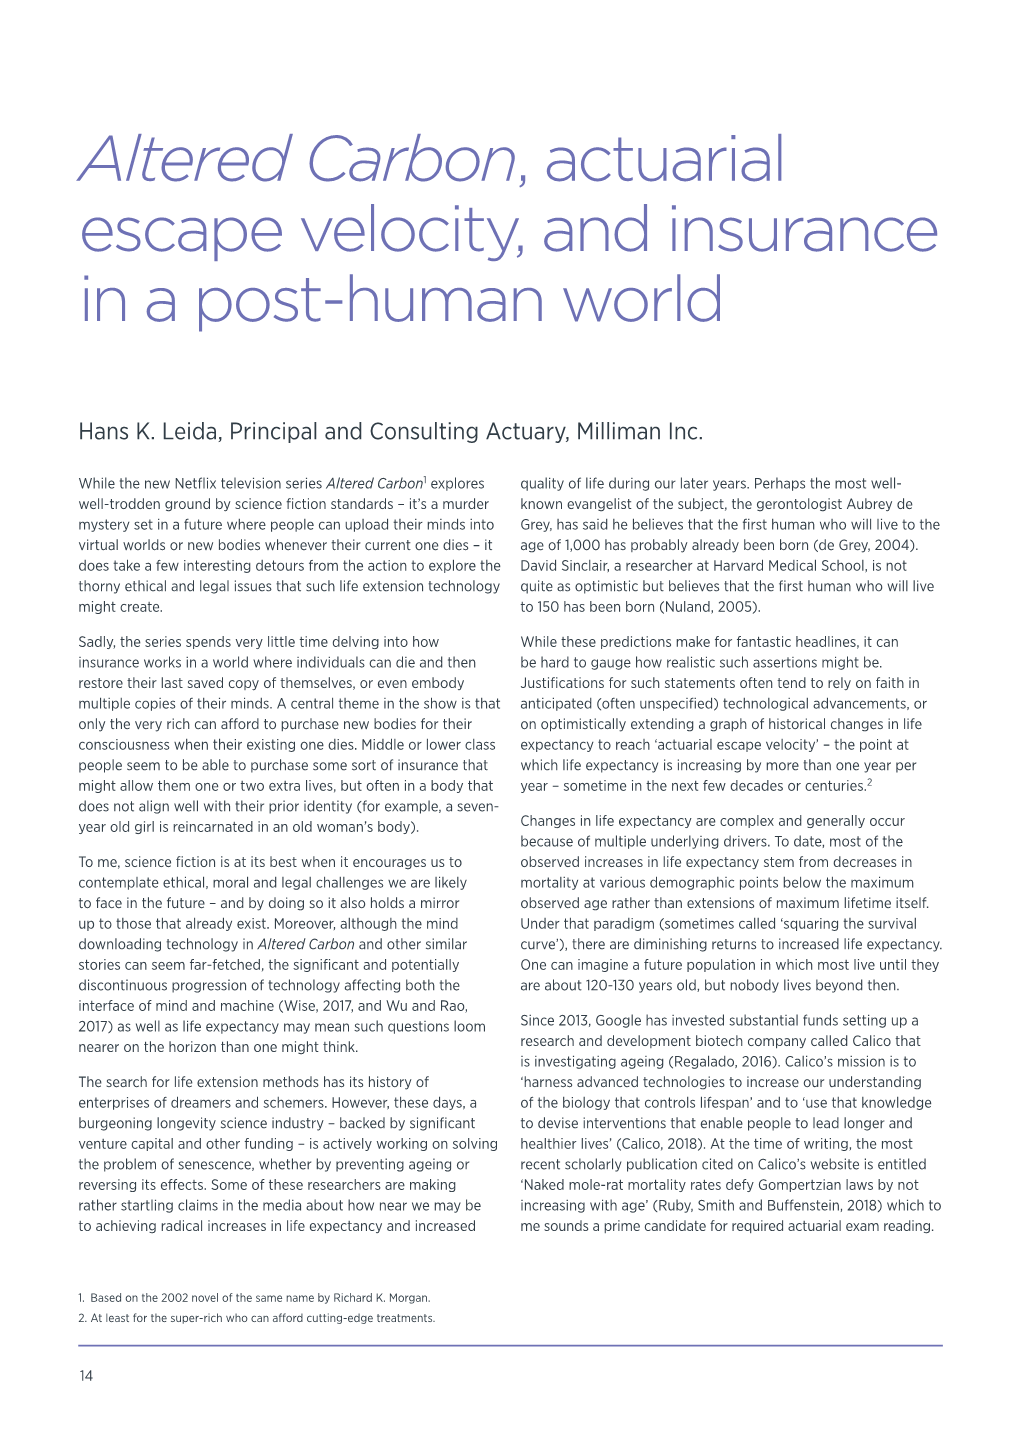 Altered Carbon, Actuarial Escape Velocity, and Insurance in a Post-Human World